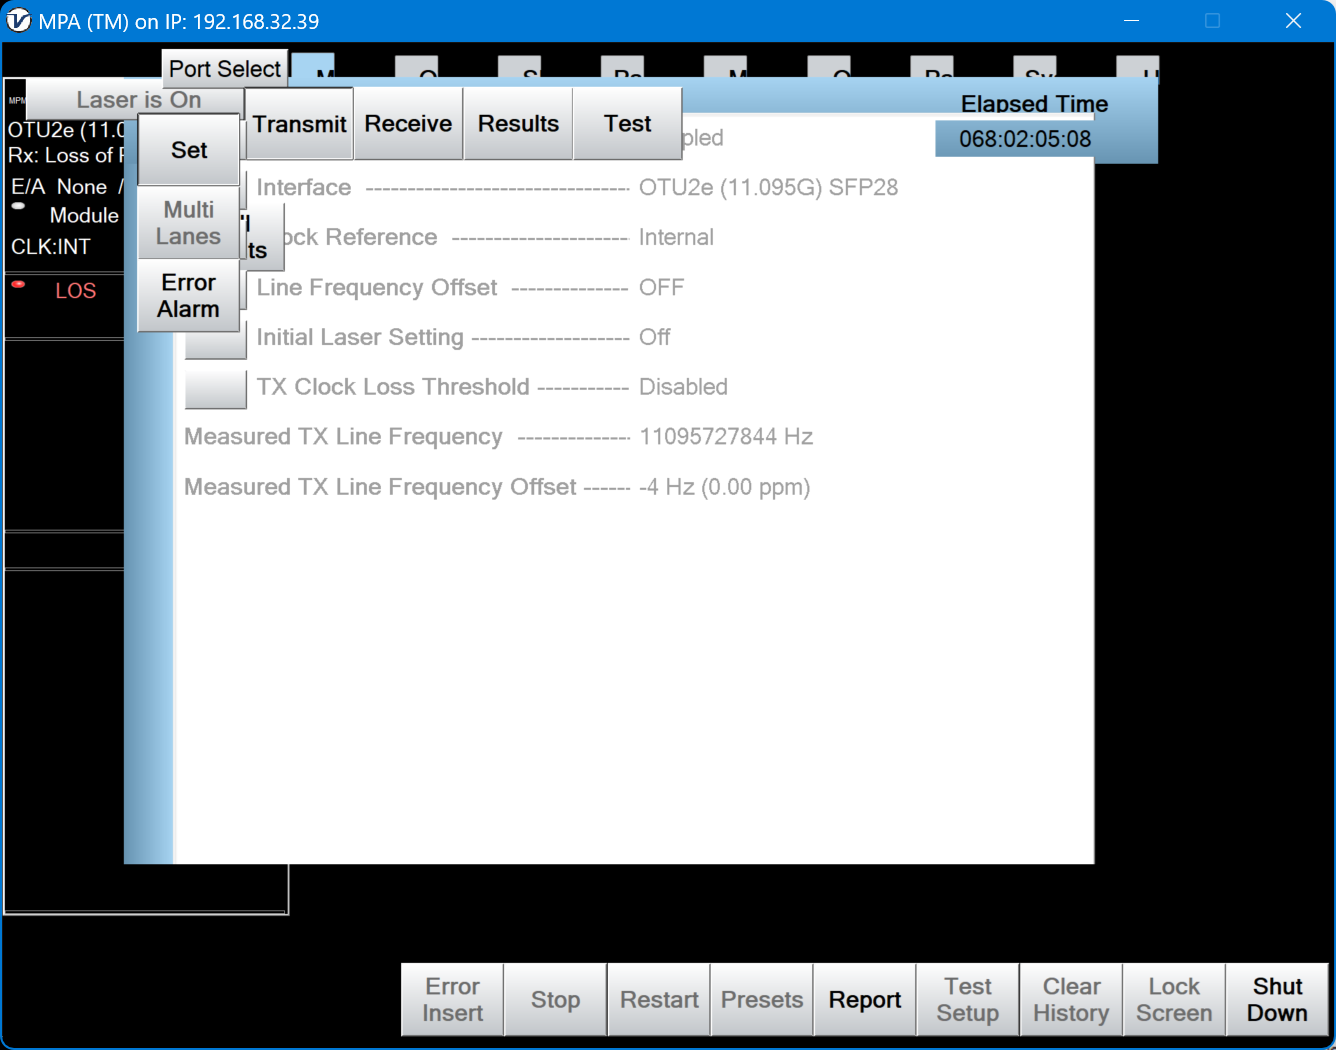 image (screenshot) of a PC application windows not being rendered correctly, with its elements misaligned.